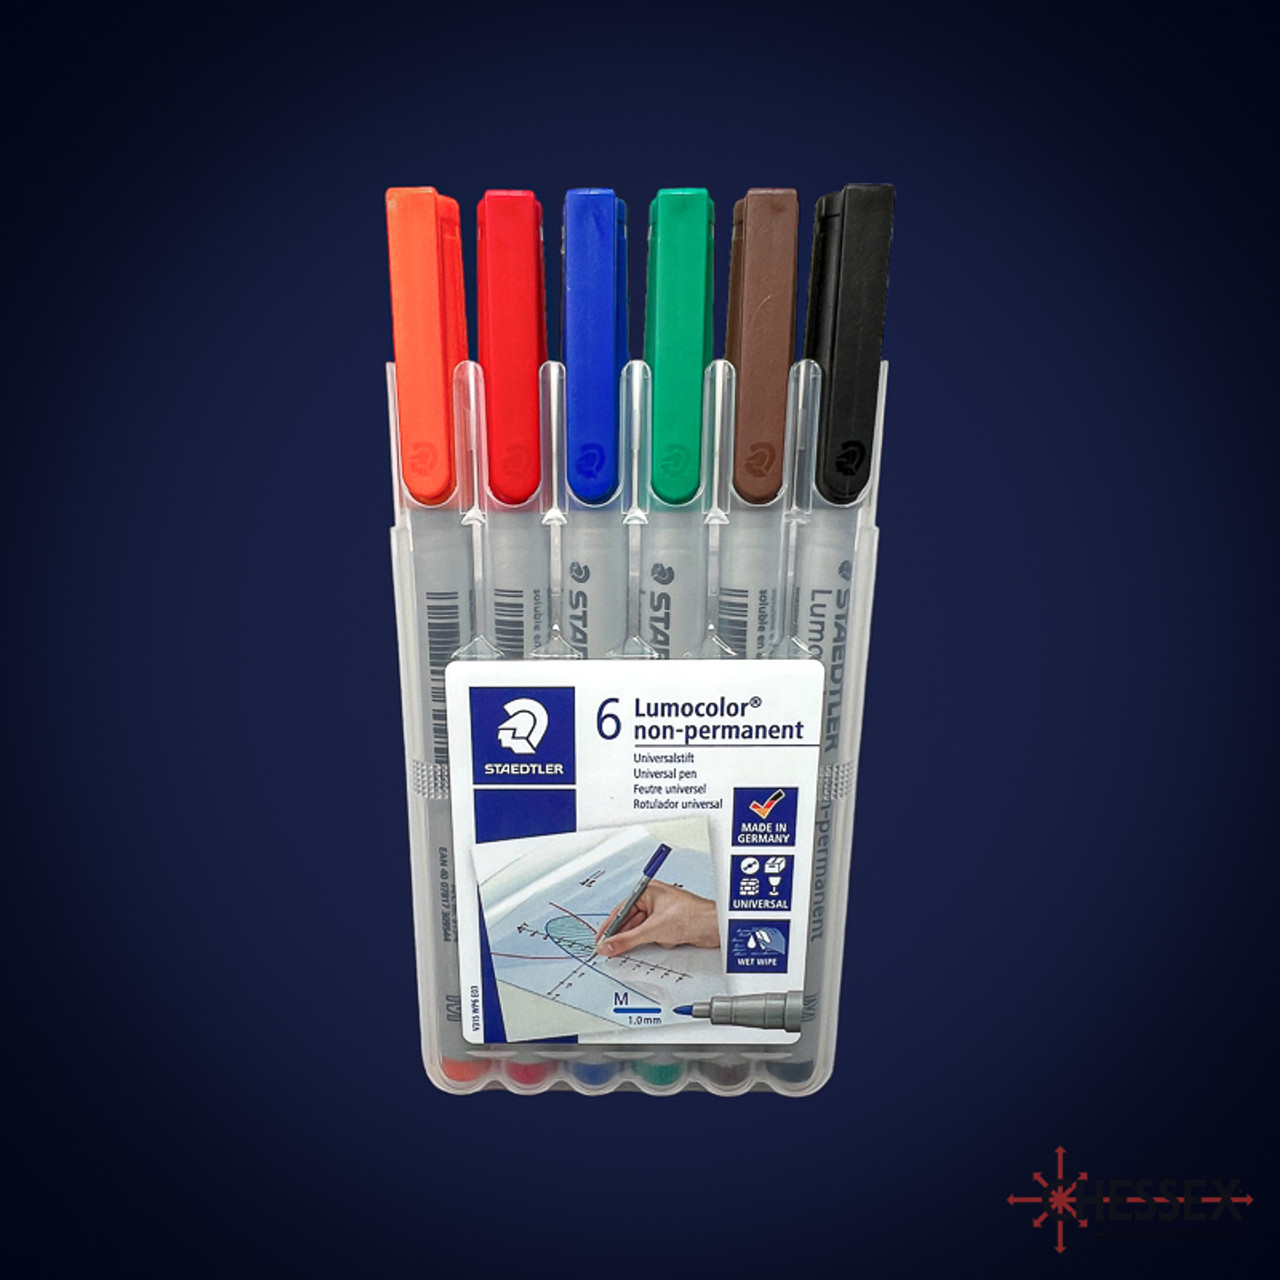 03156 - Water Soluble 6-Pack Markers Medium-Tip (1 each Red, Blue, Green,  Black, Orange, and Brown)